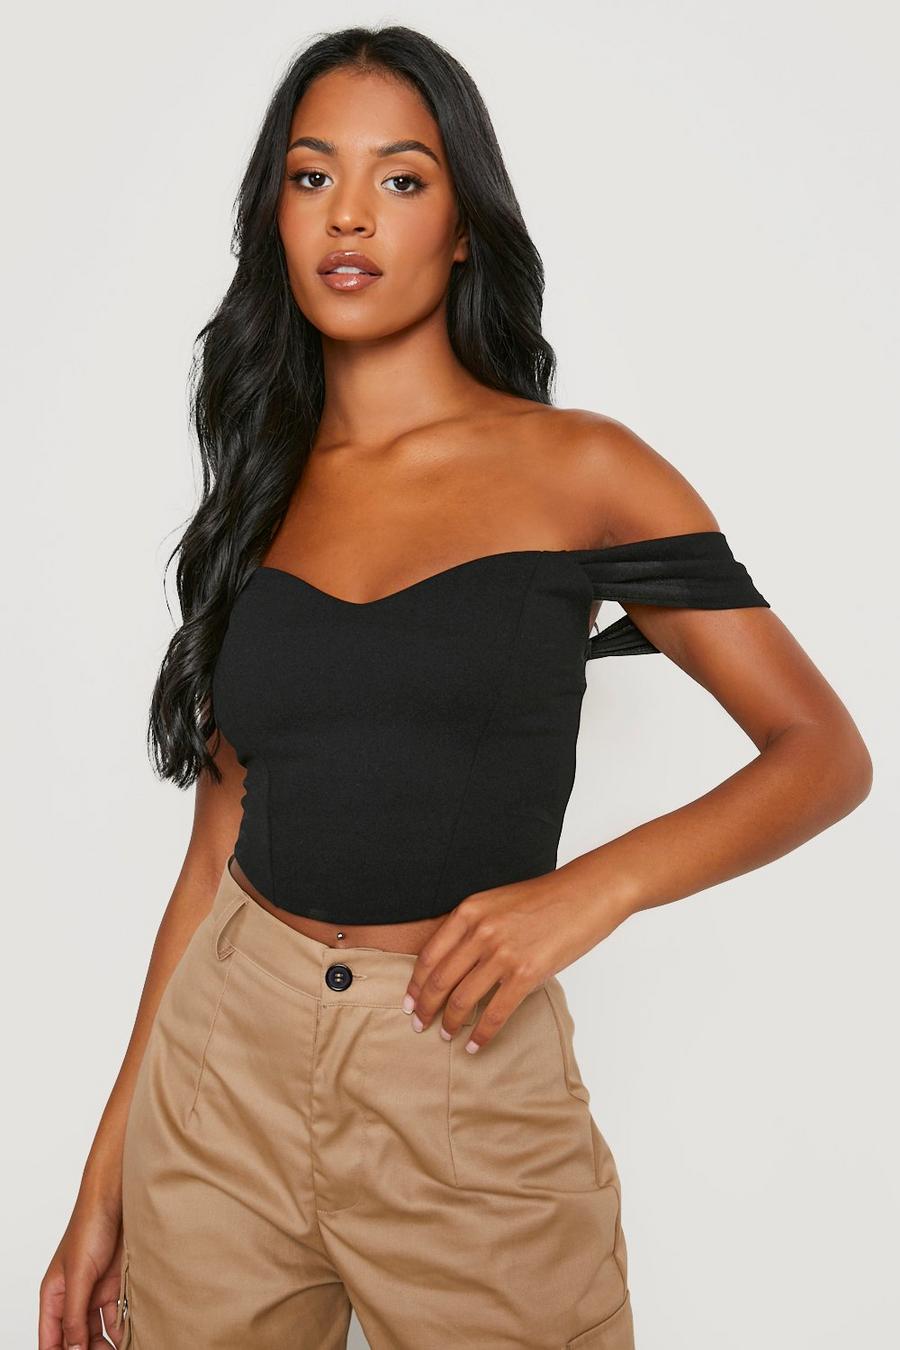 Off-The-Shoulder Tops for Tall Women